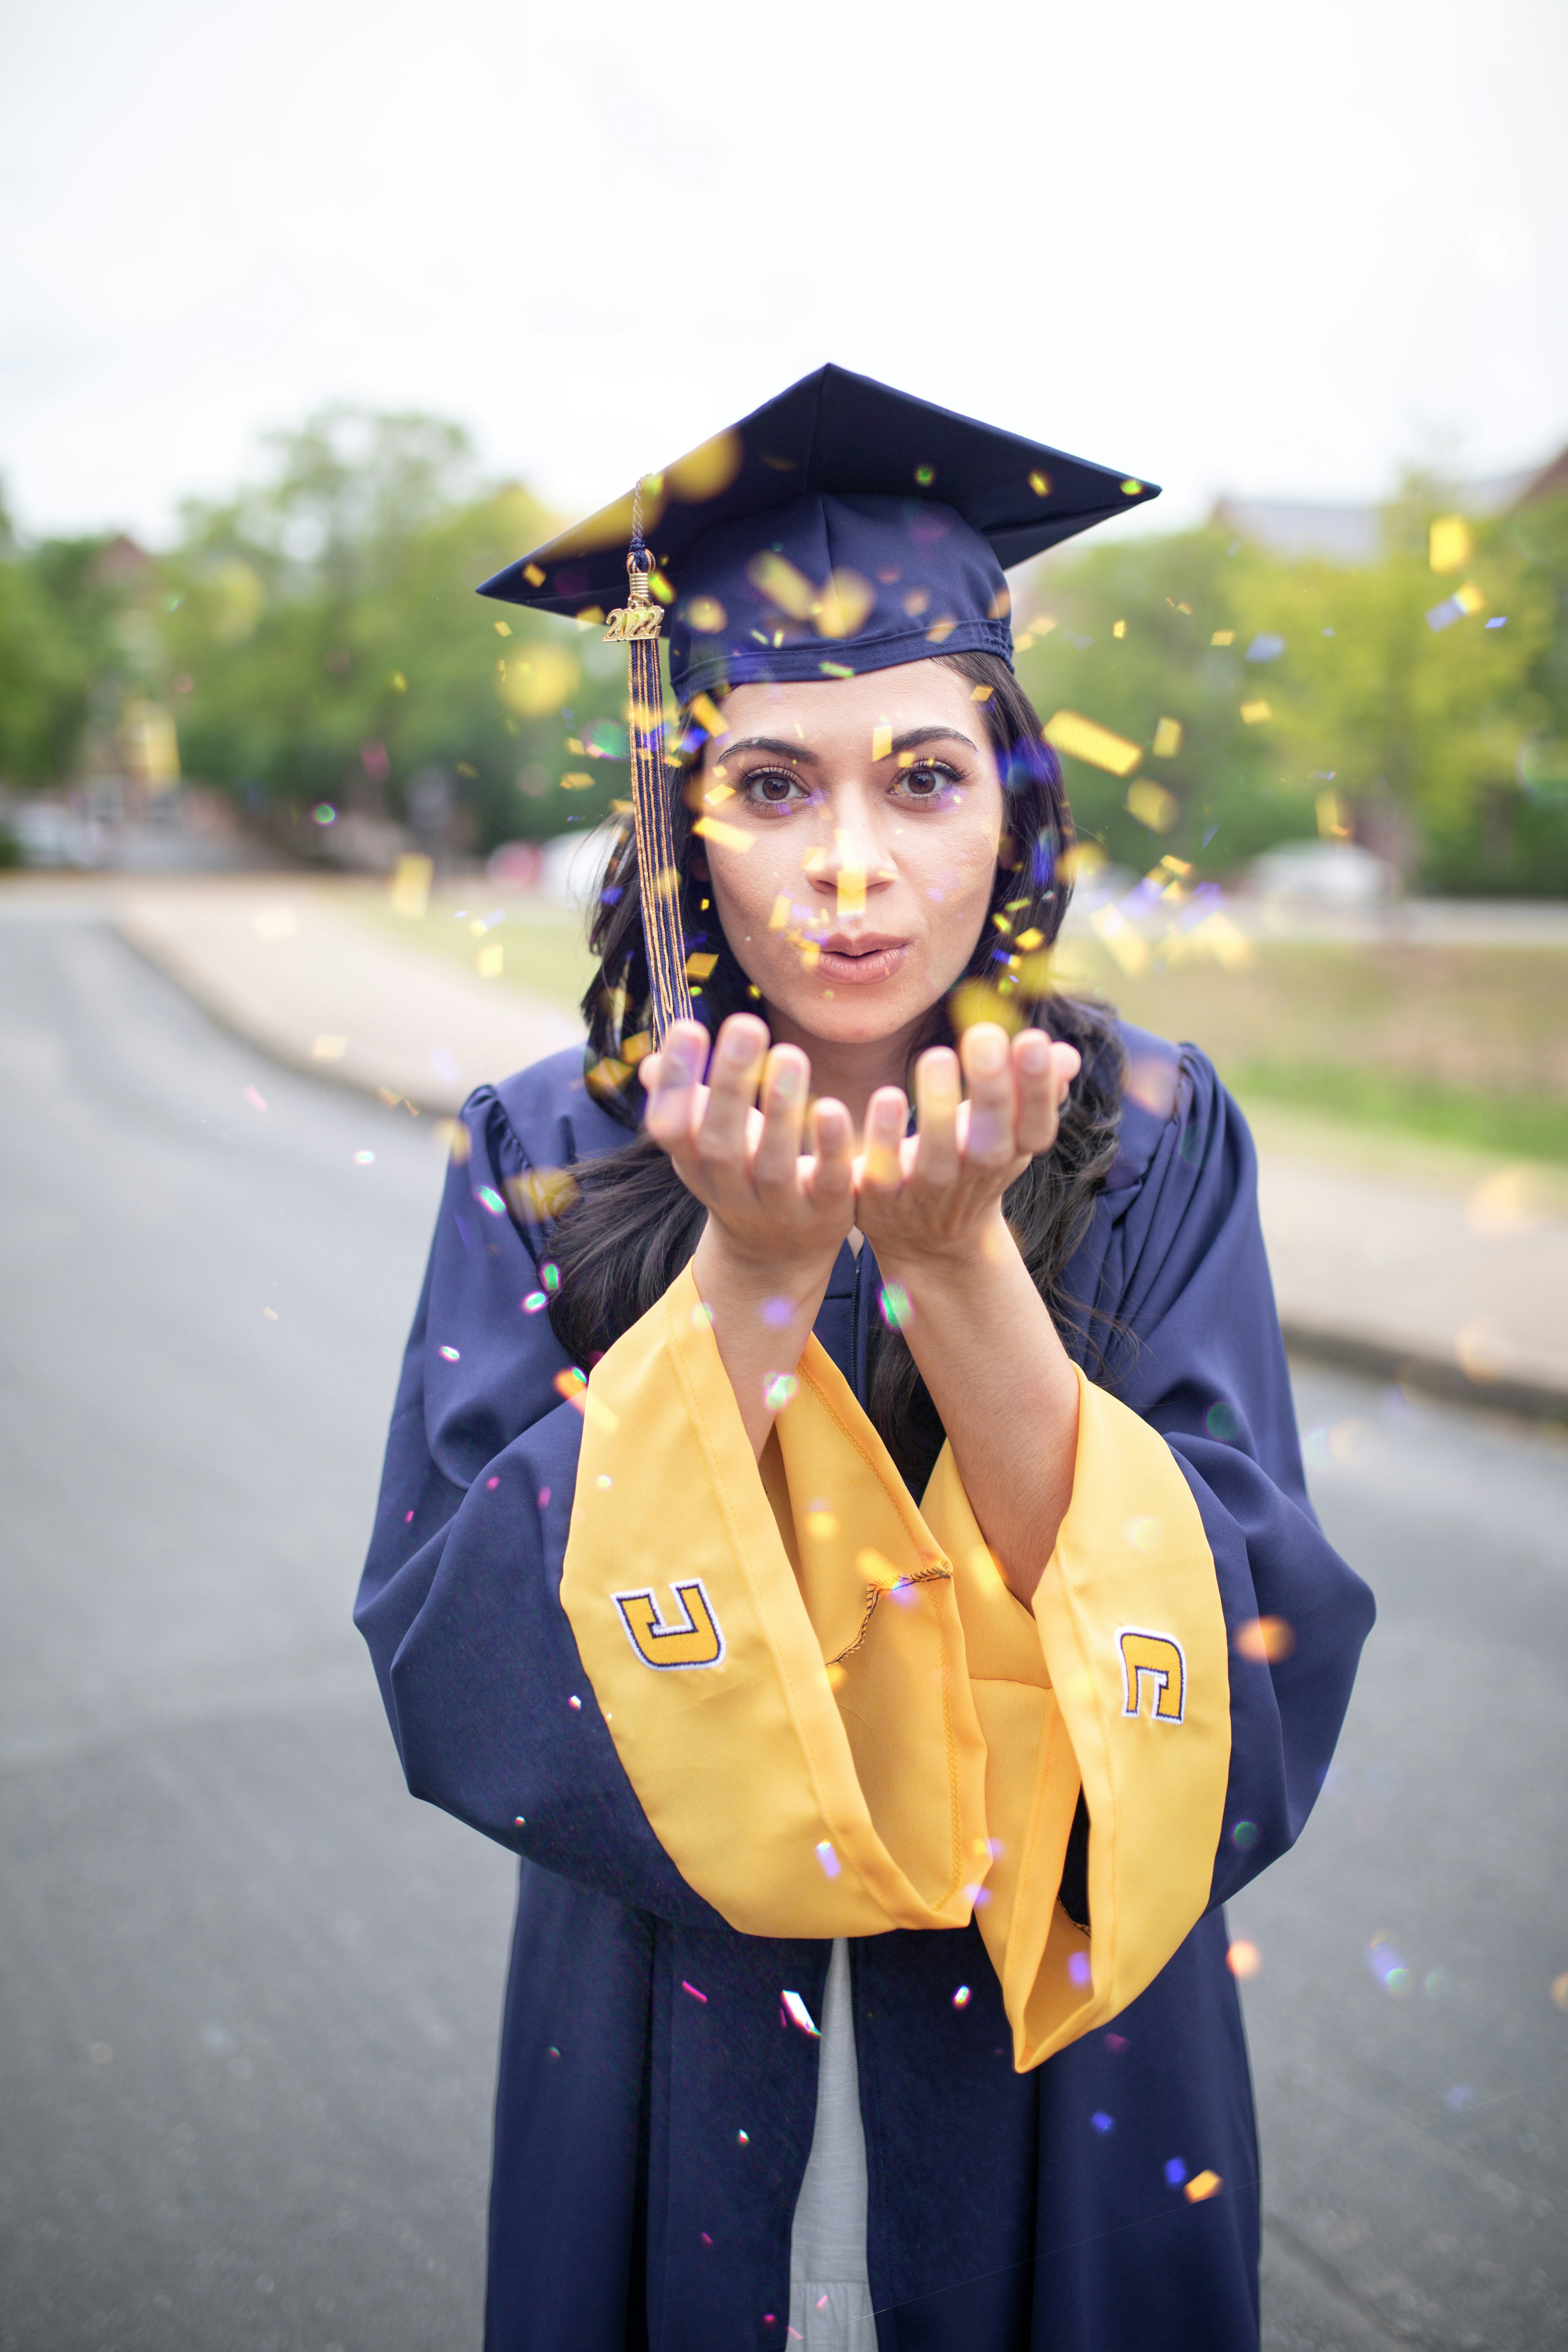 latina blowing yellow glitter into the camera. she is wearing a blue and yellow graduation cap and gown